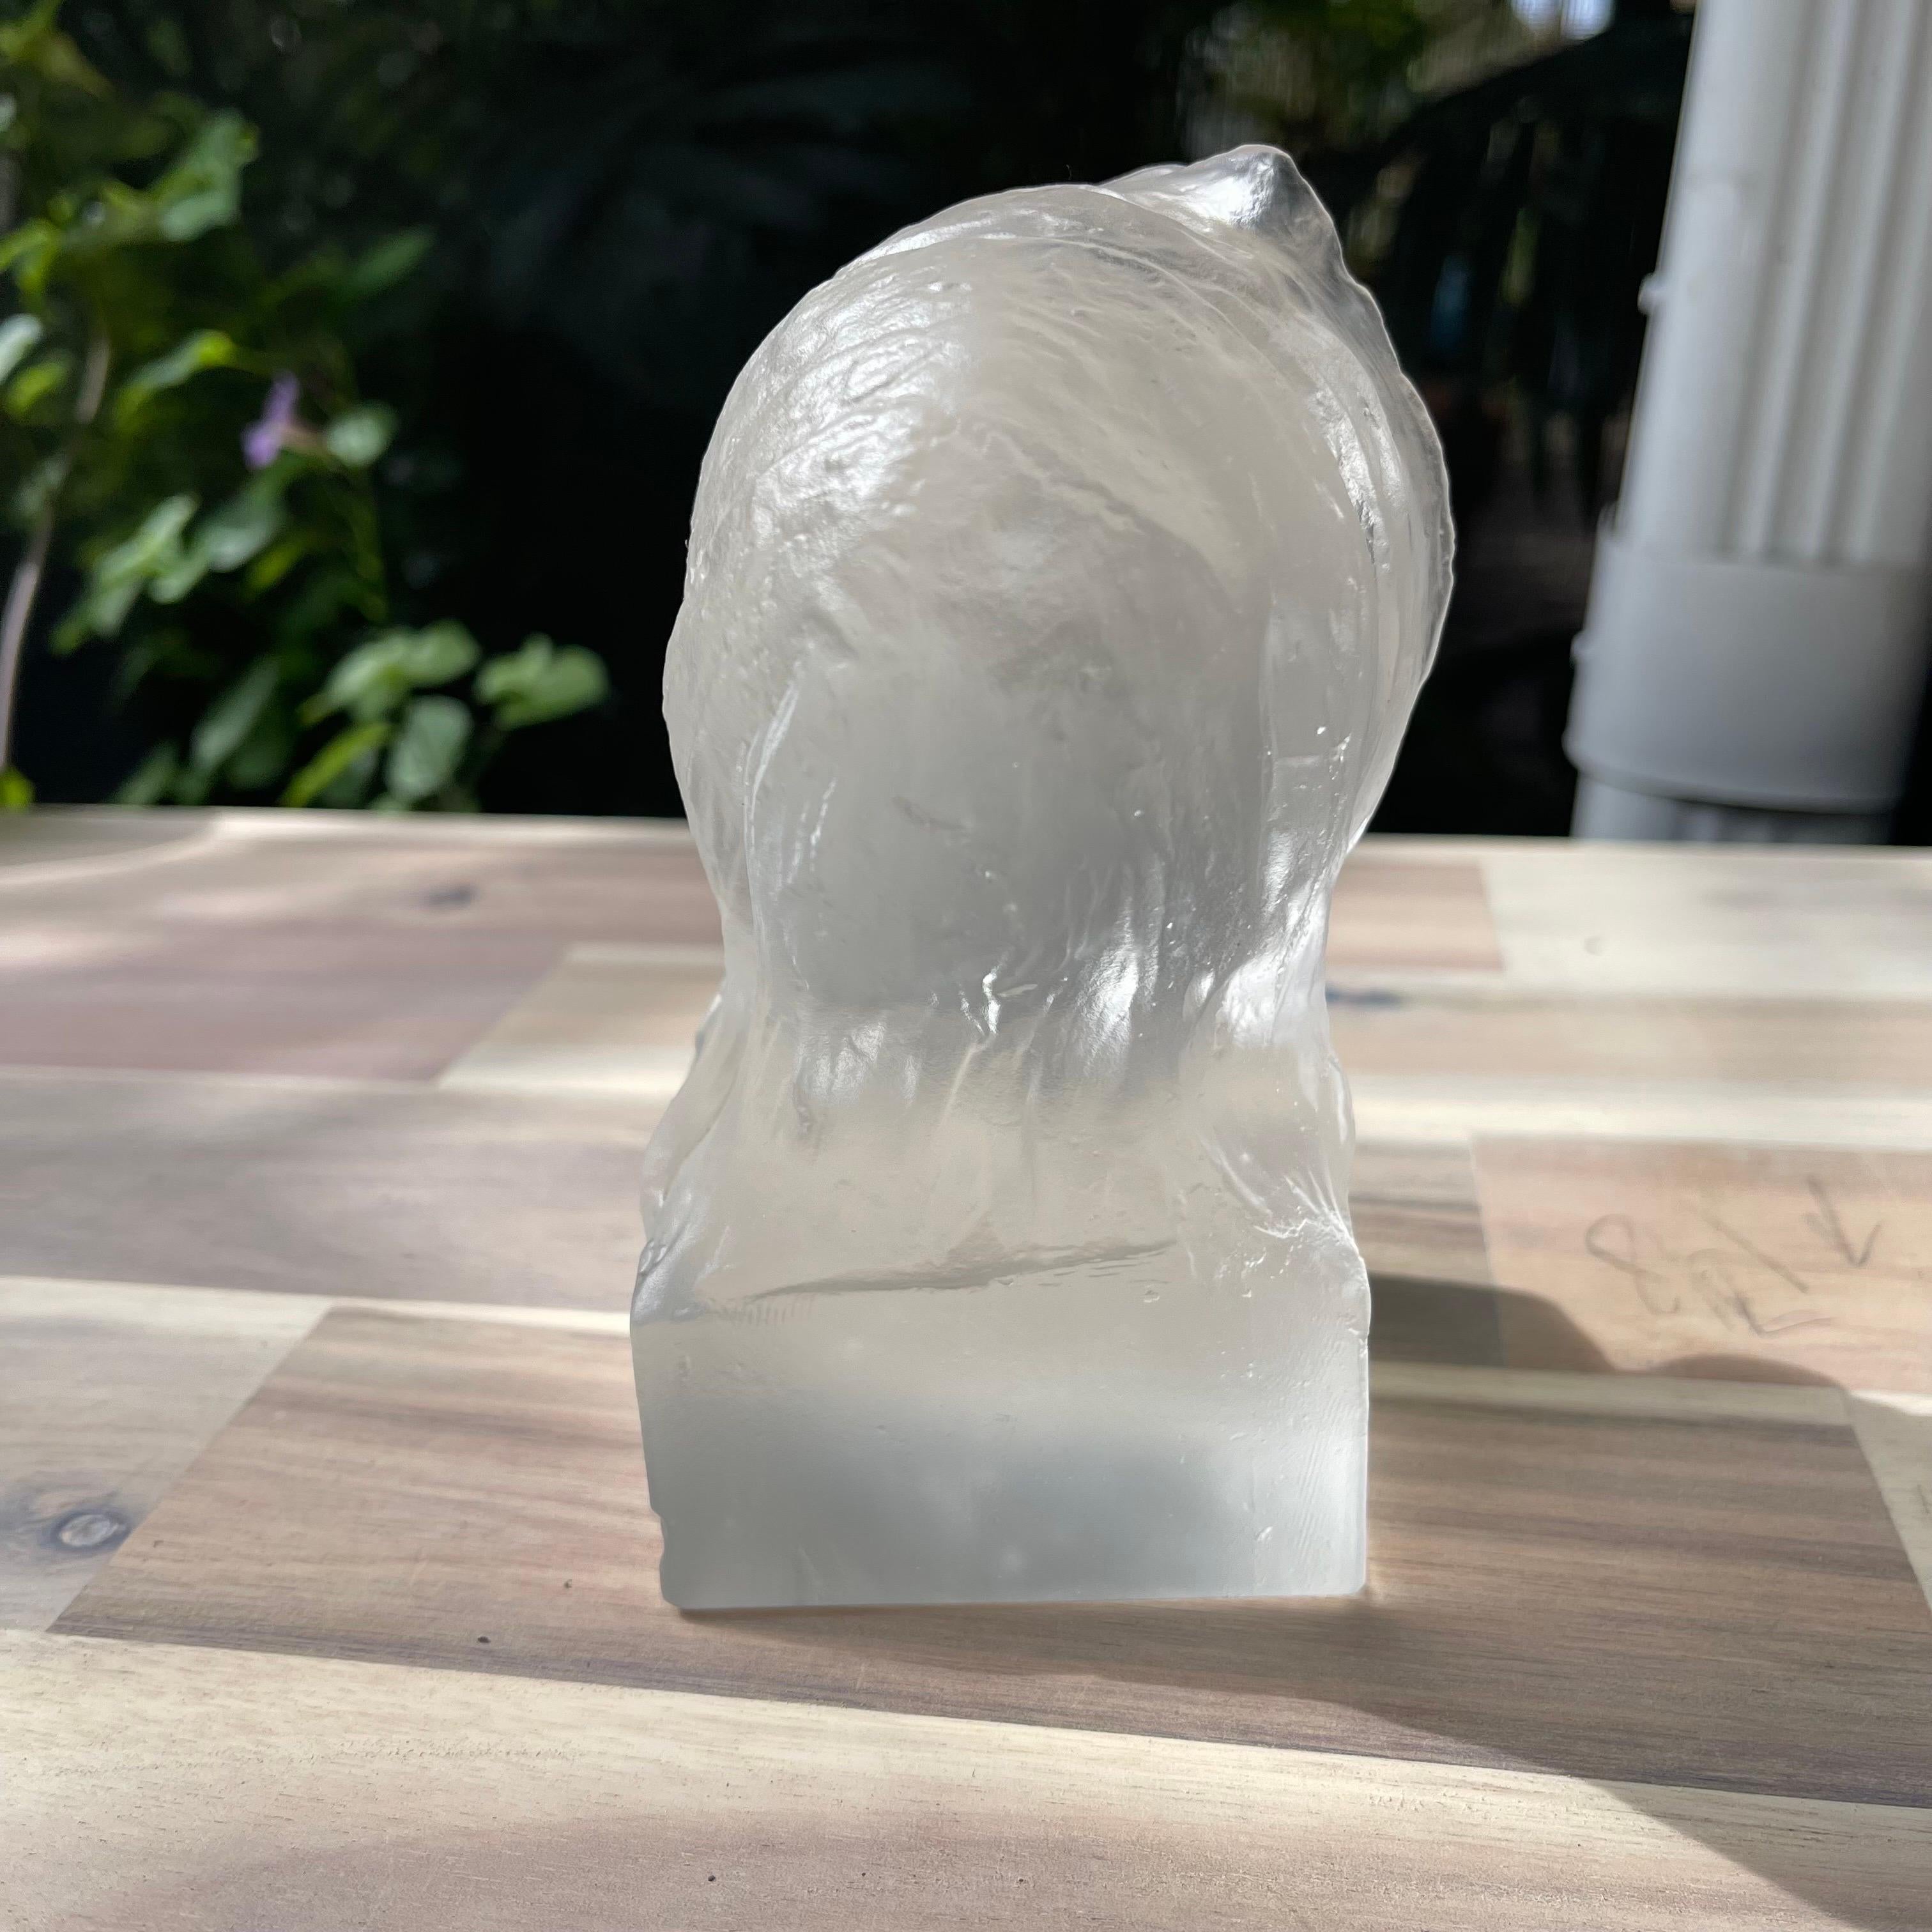 Mid-20th Century Frederick Carder Cire Perdue Glass Bust Sculpture, Signed & Dated 1938 For Sale